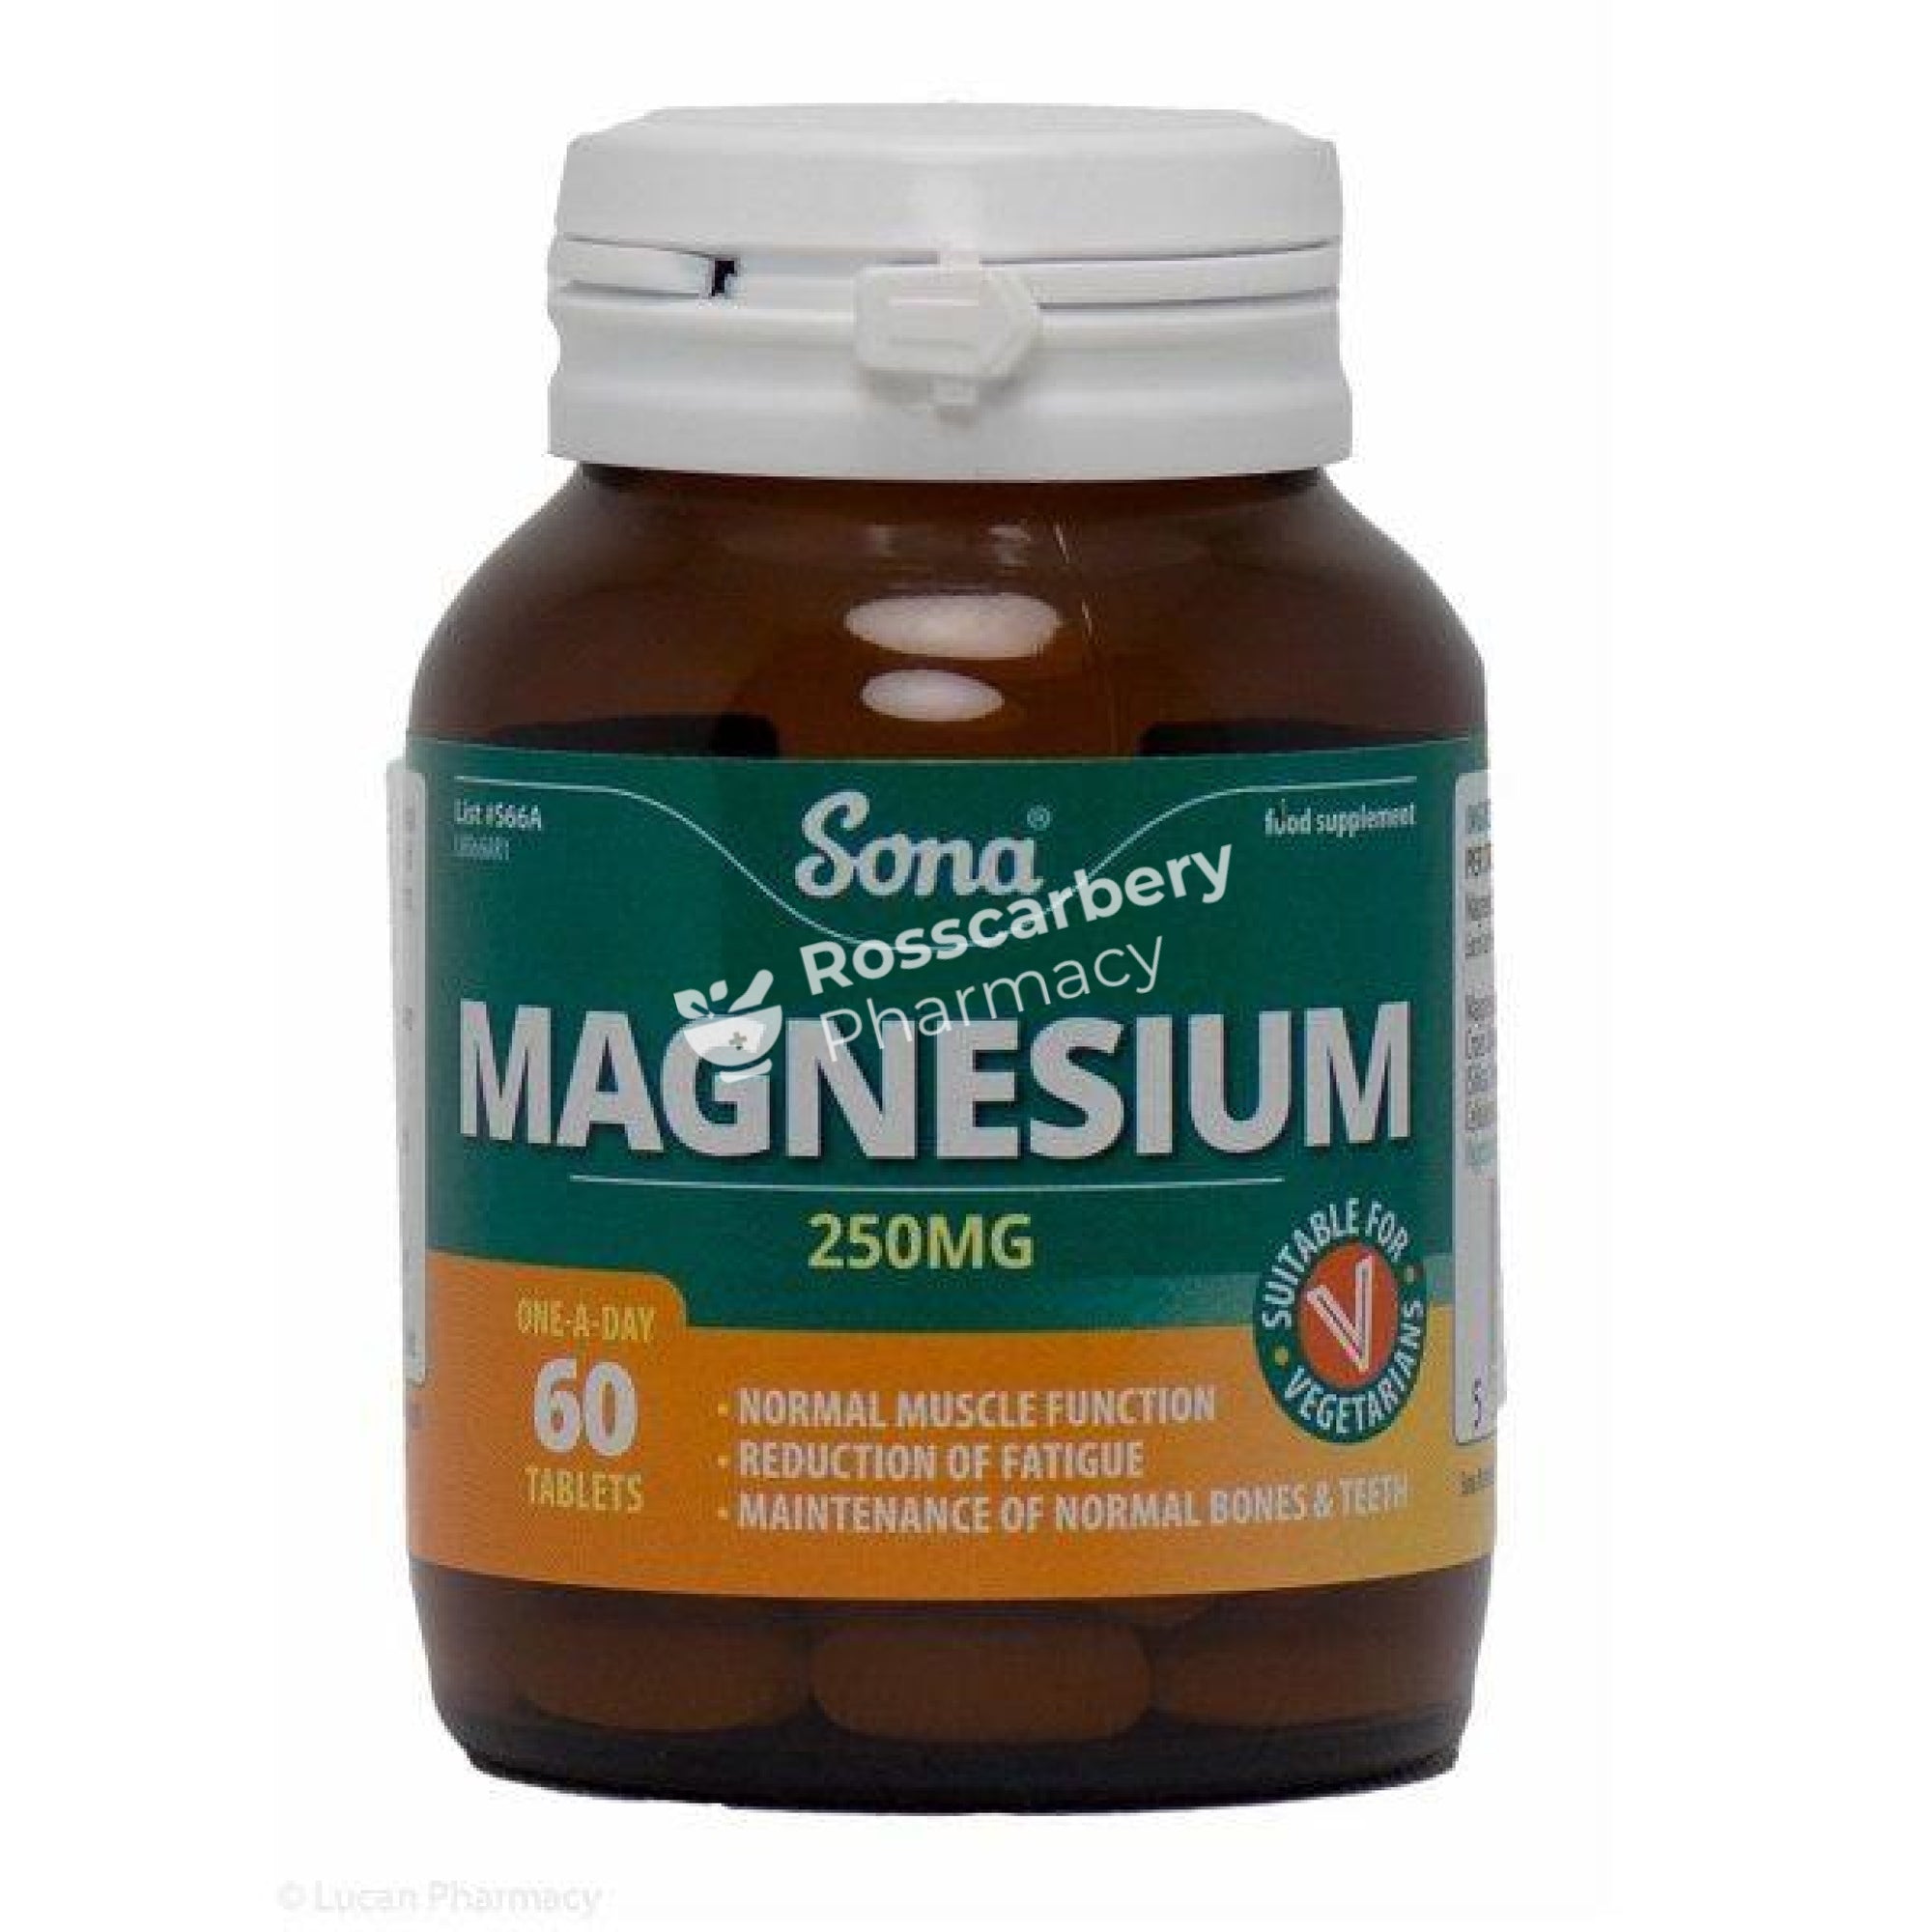 Sona - Magnesium 250Mg One-A-Day Energy & Wellbeing